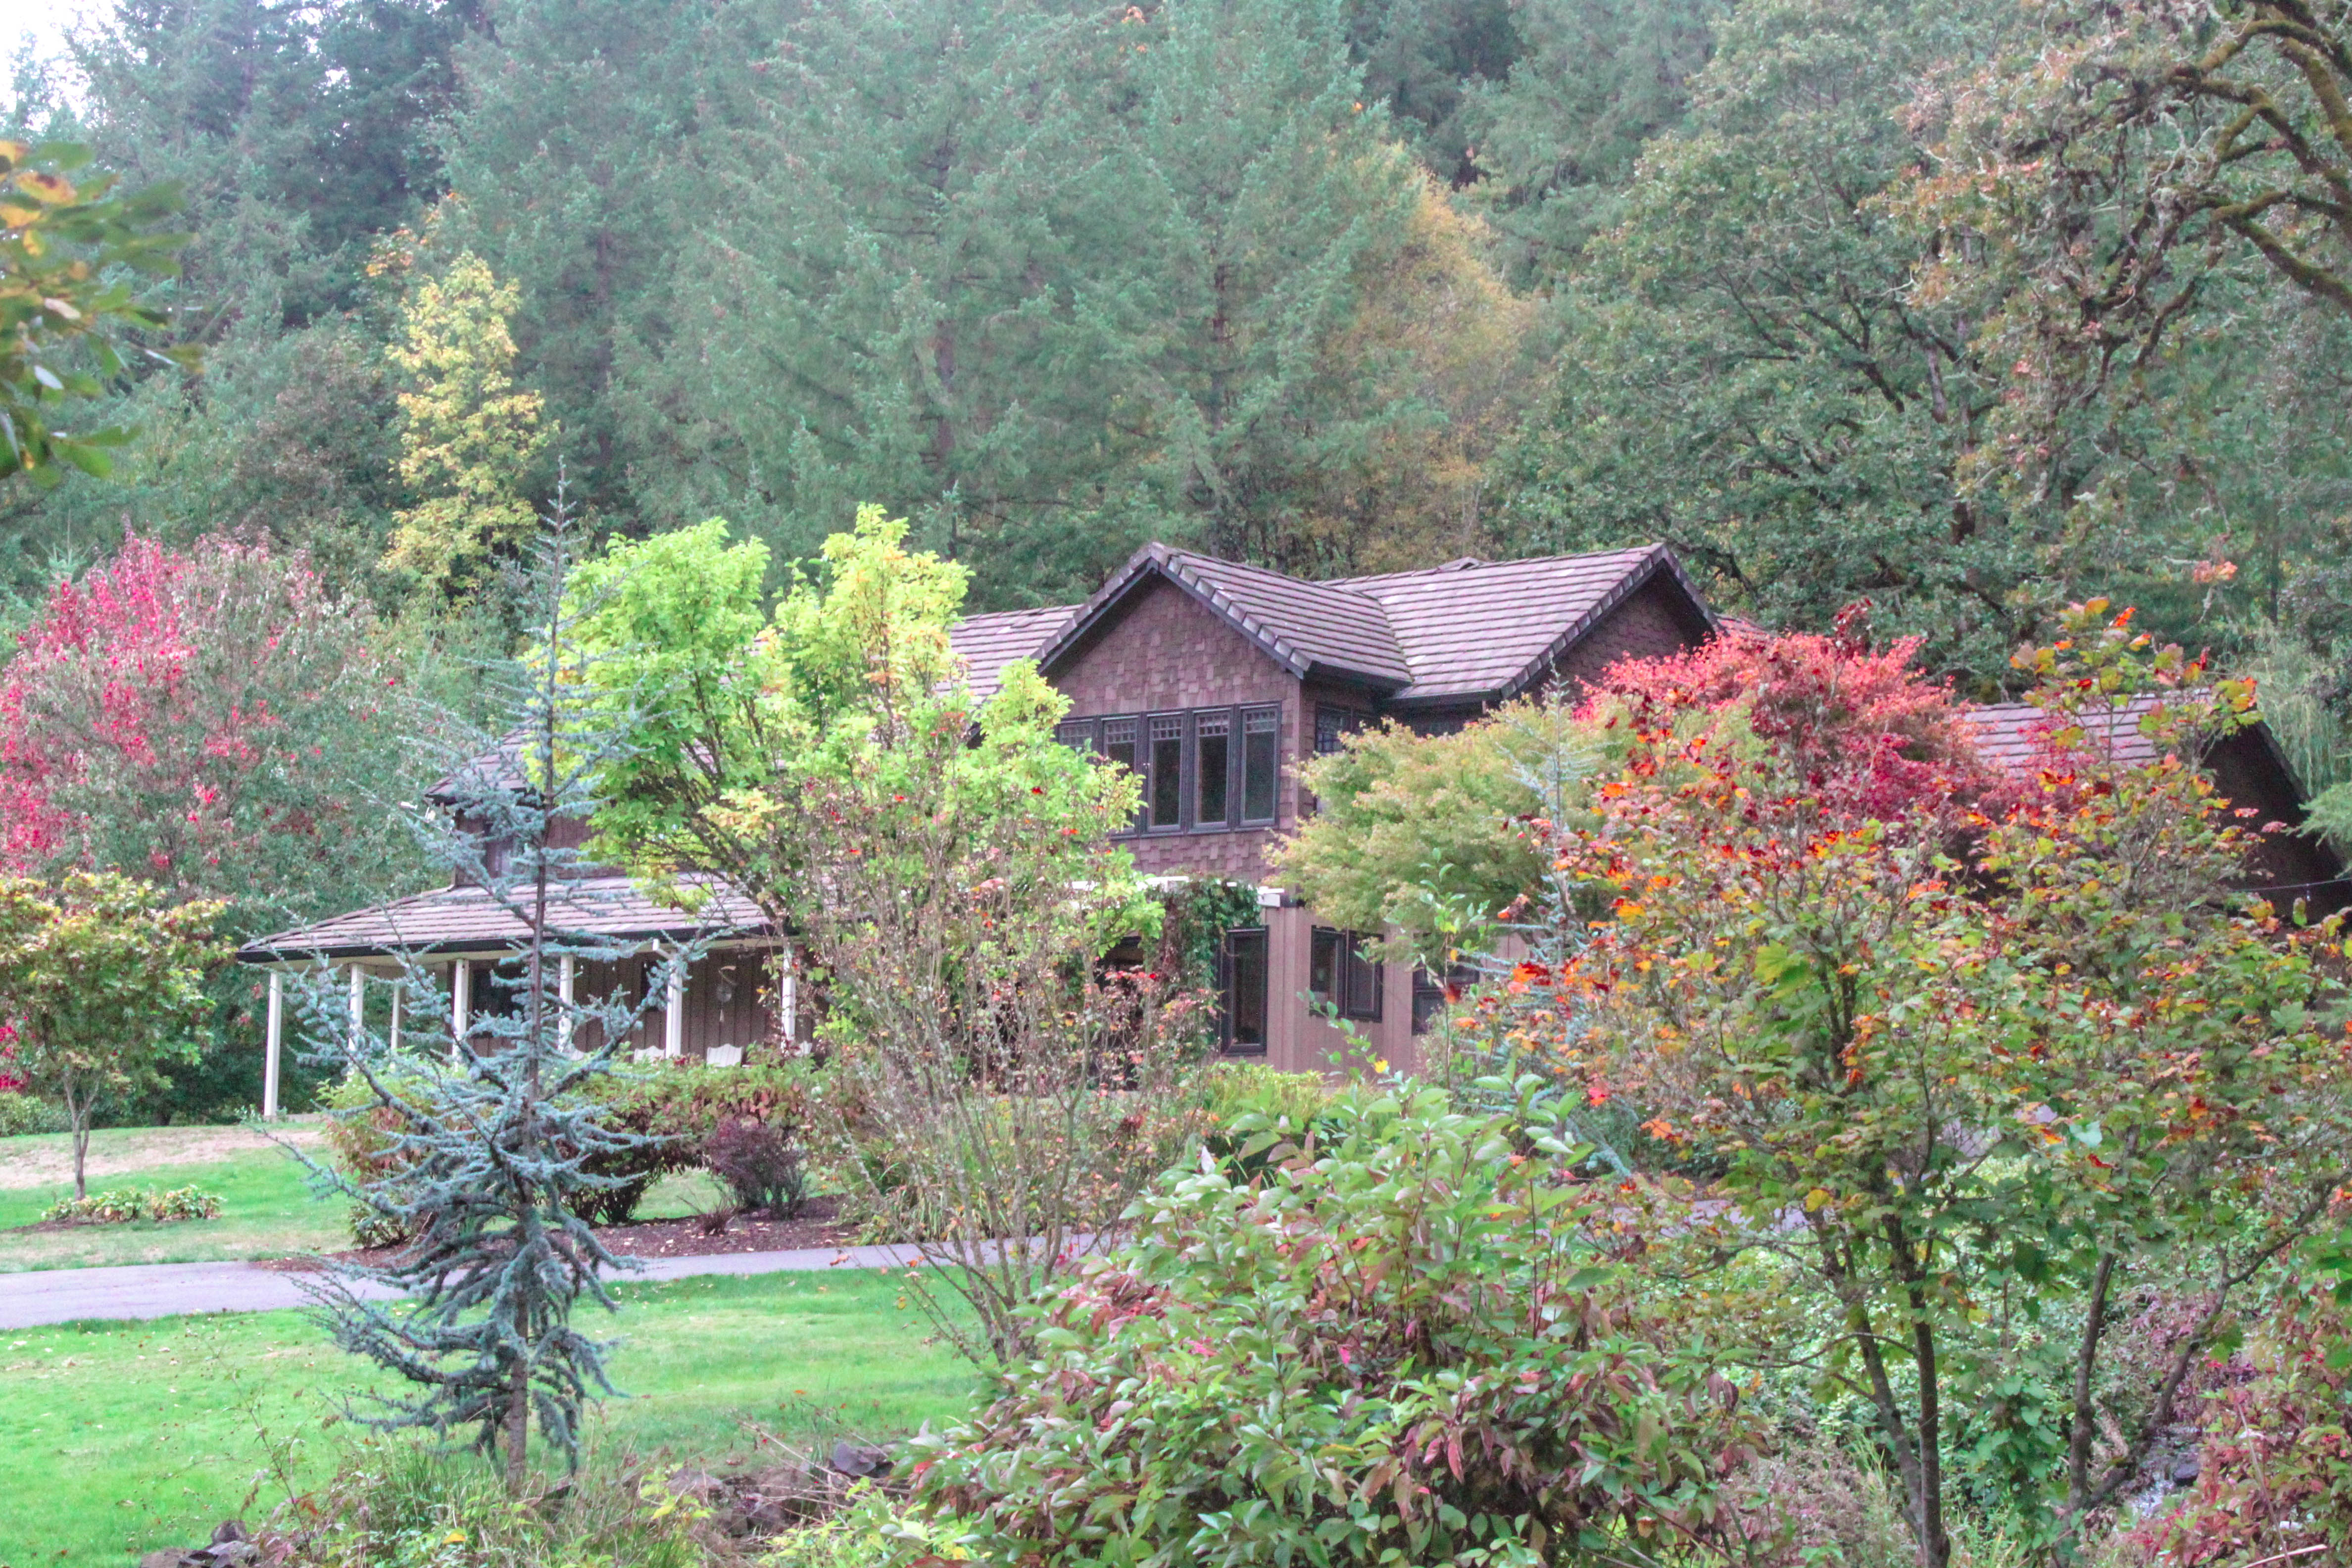 Oregon Wine Country Travel Guide: The Brookside Inn